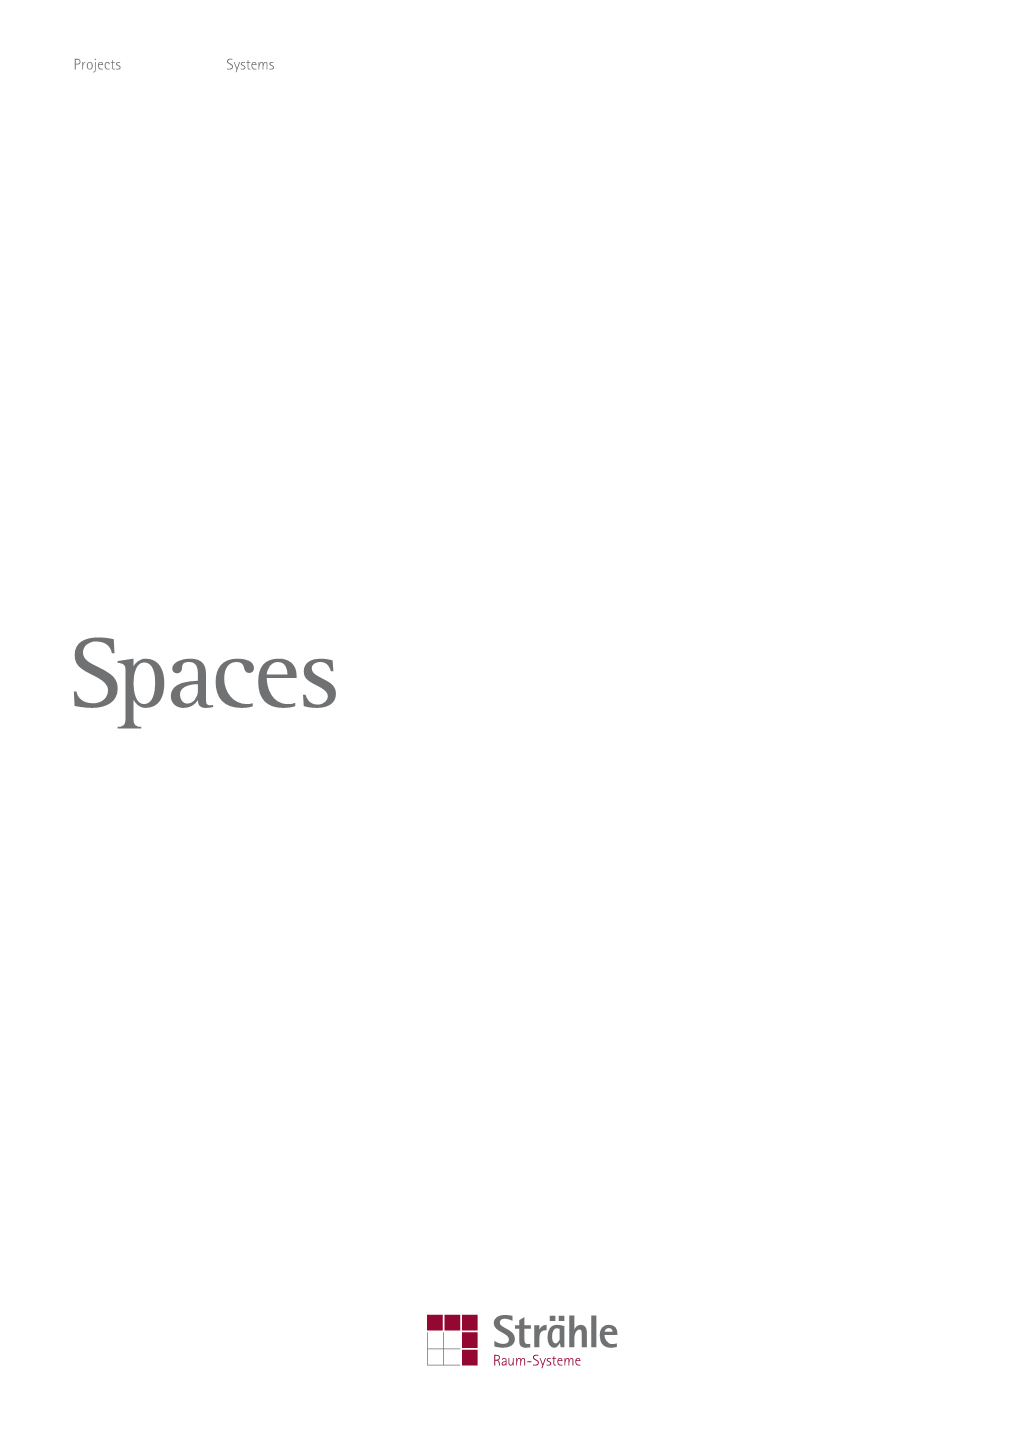 Spaces Projects Systems